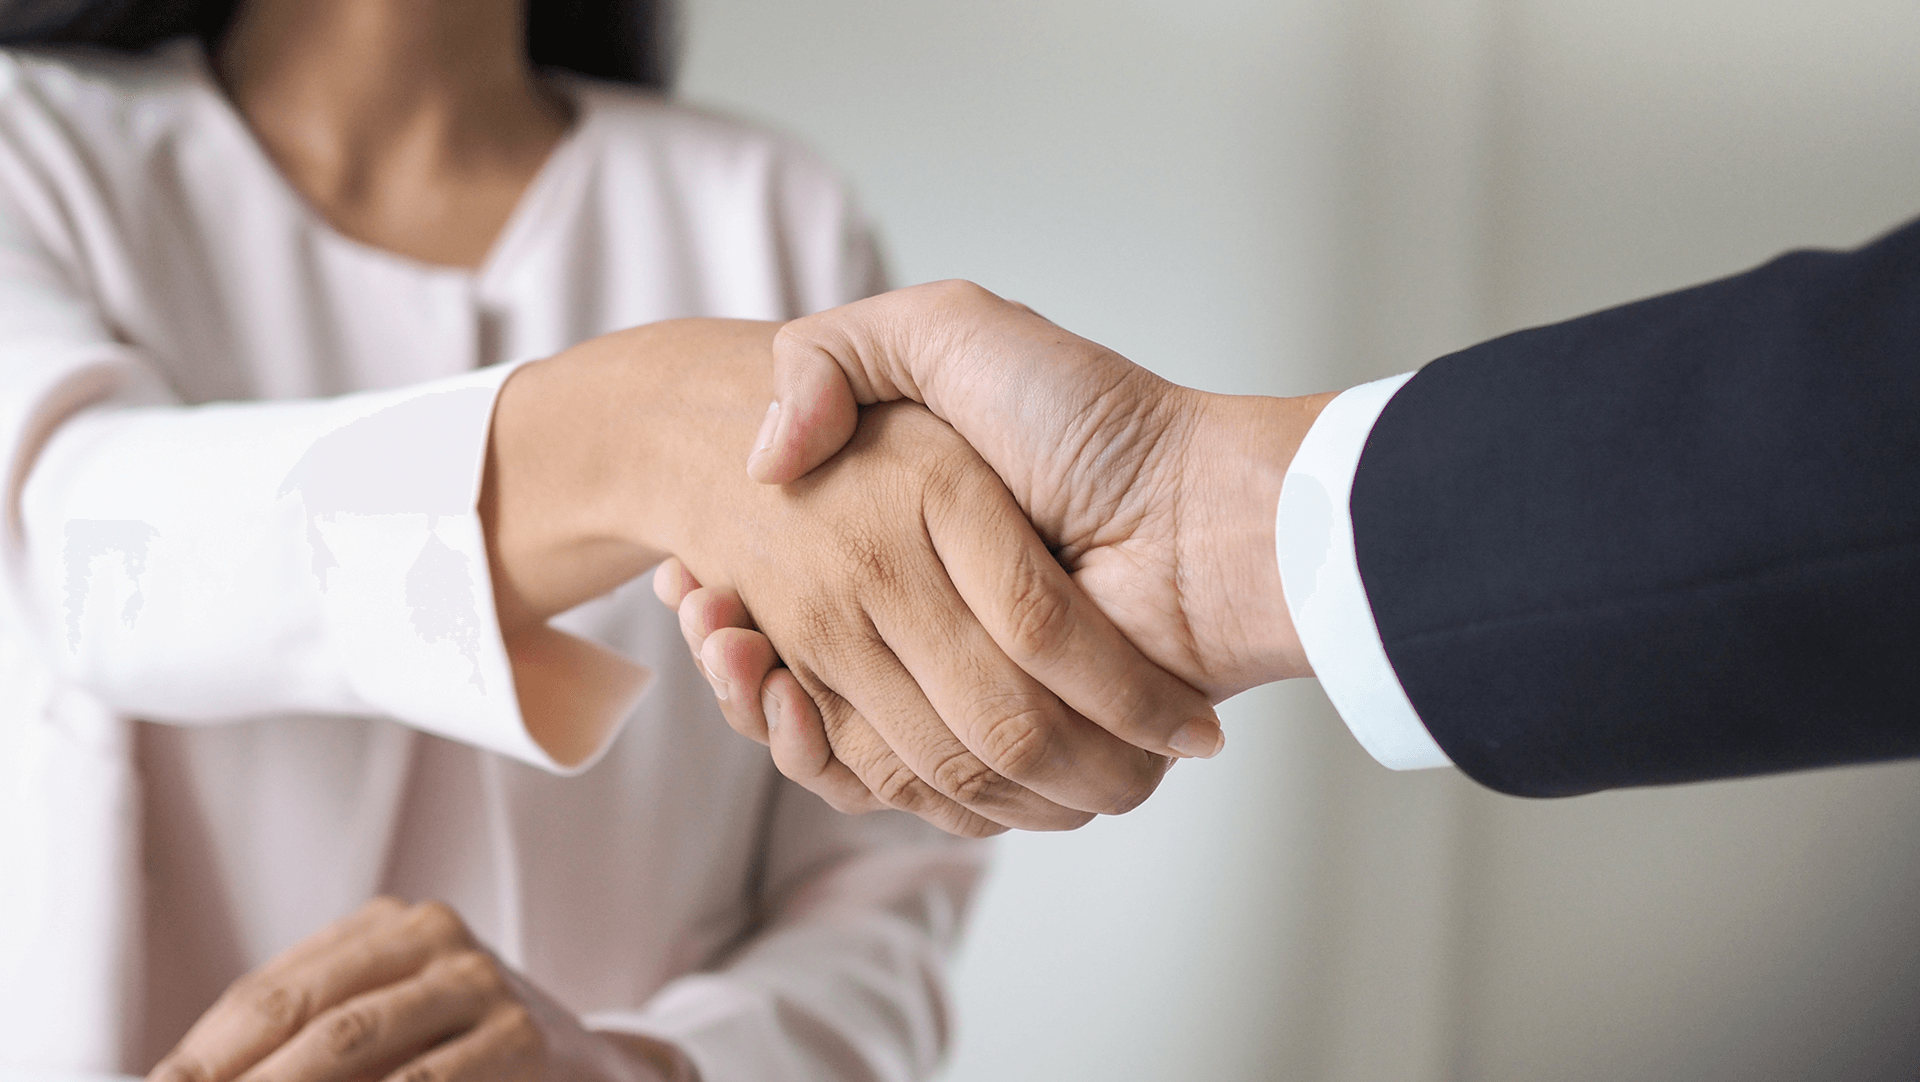 A professional handshake between two individuals, signaling a formal agreement or introduction.